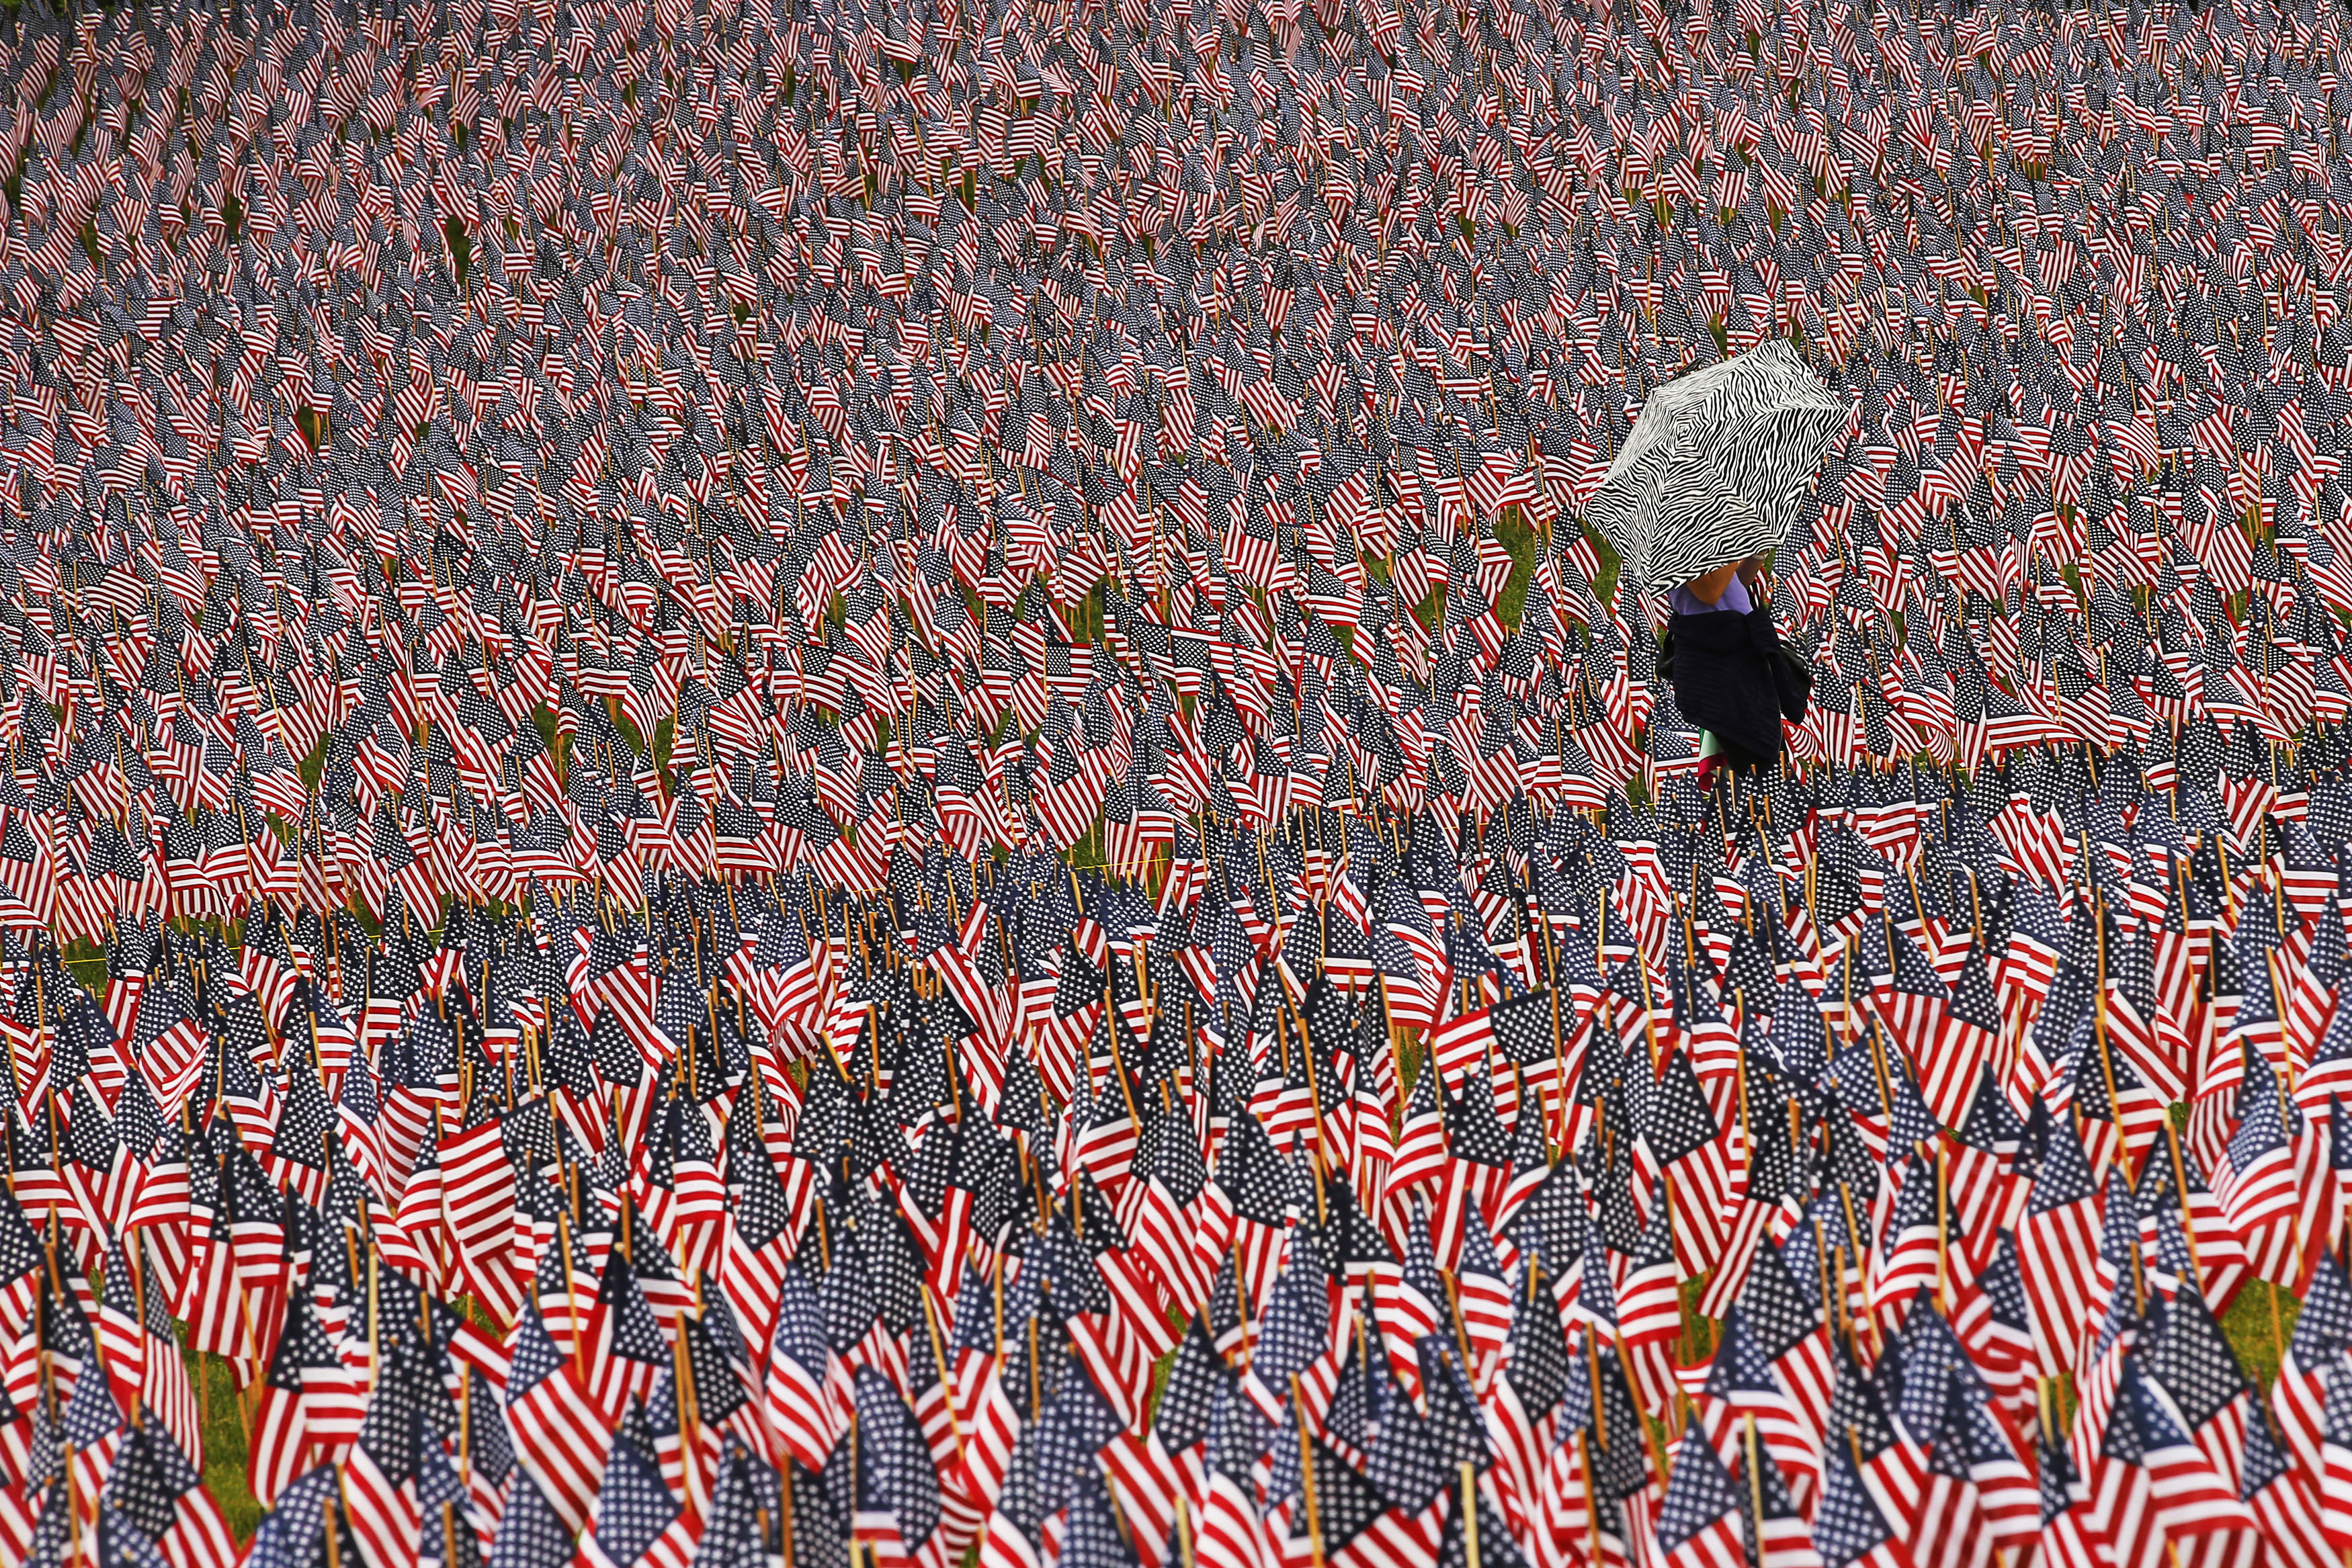 Pedestrian carrying an umbrella walks through a Memorial Day display of United States flags on the Boston Common in Boston